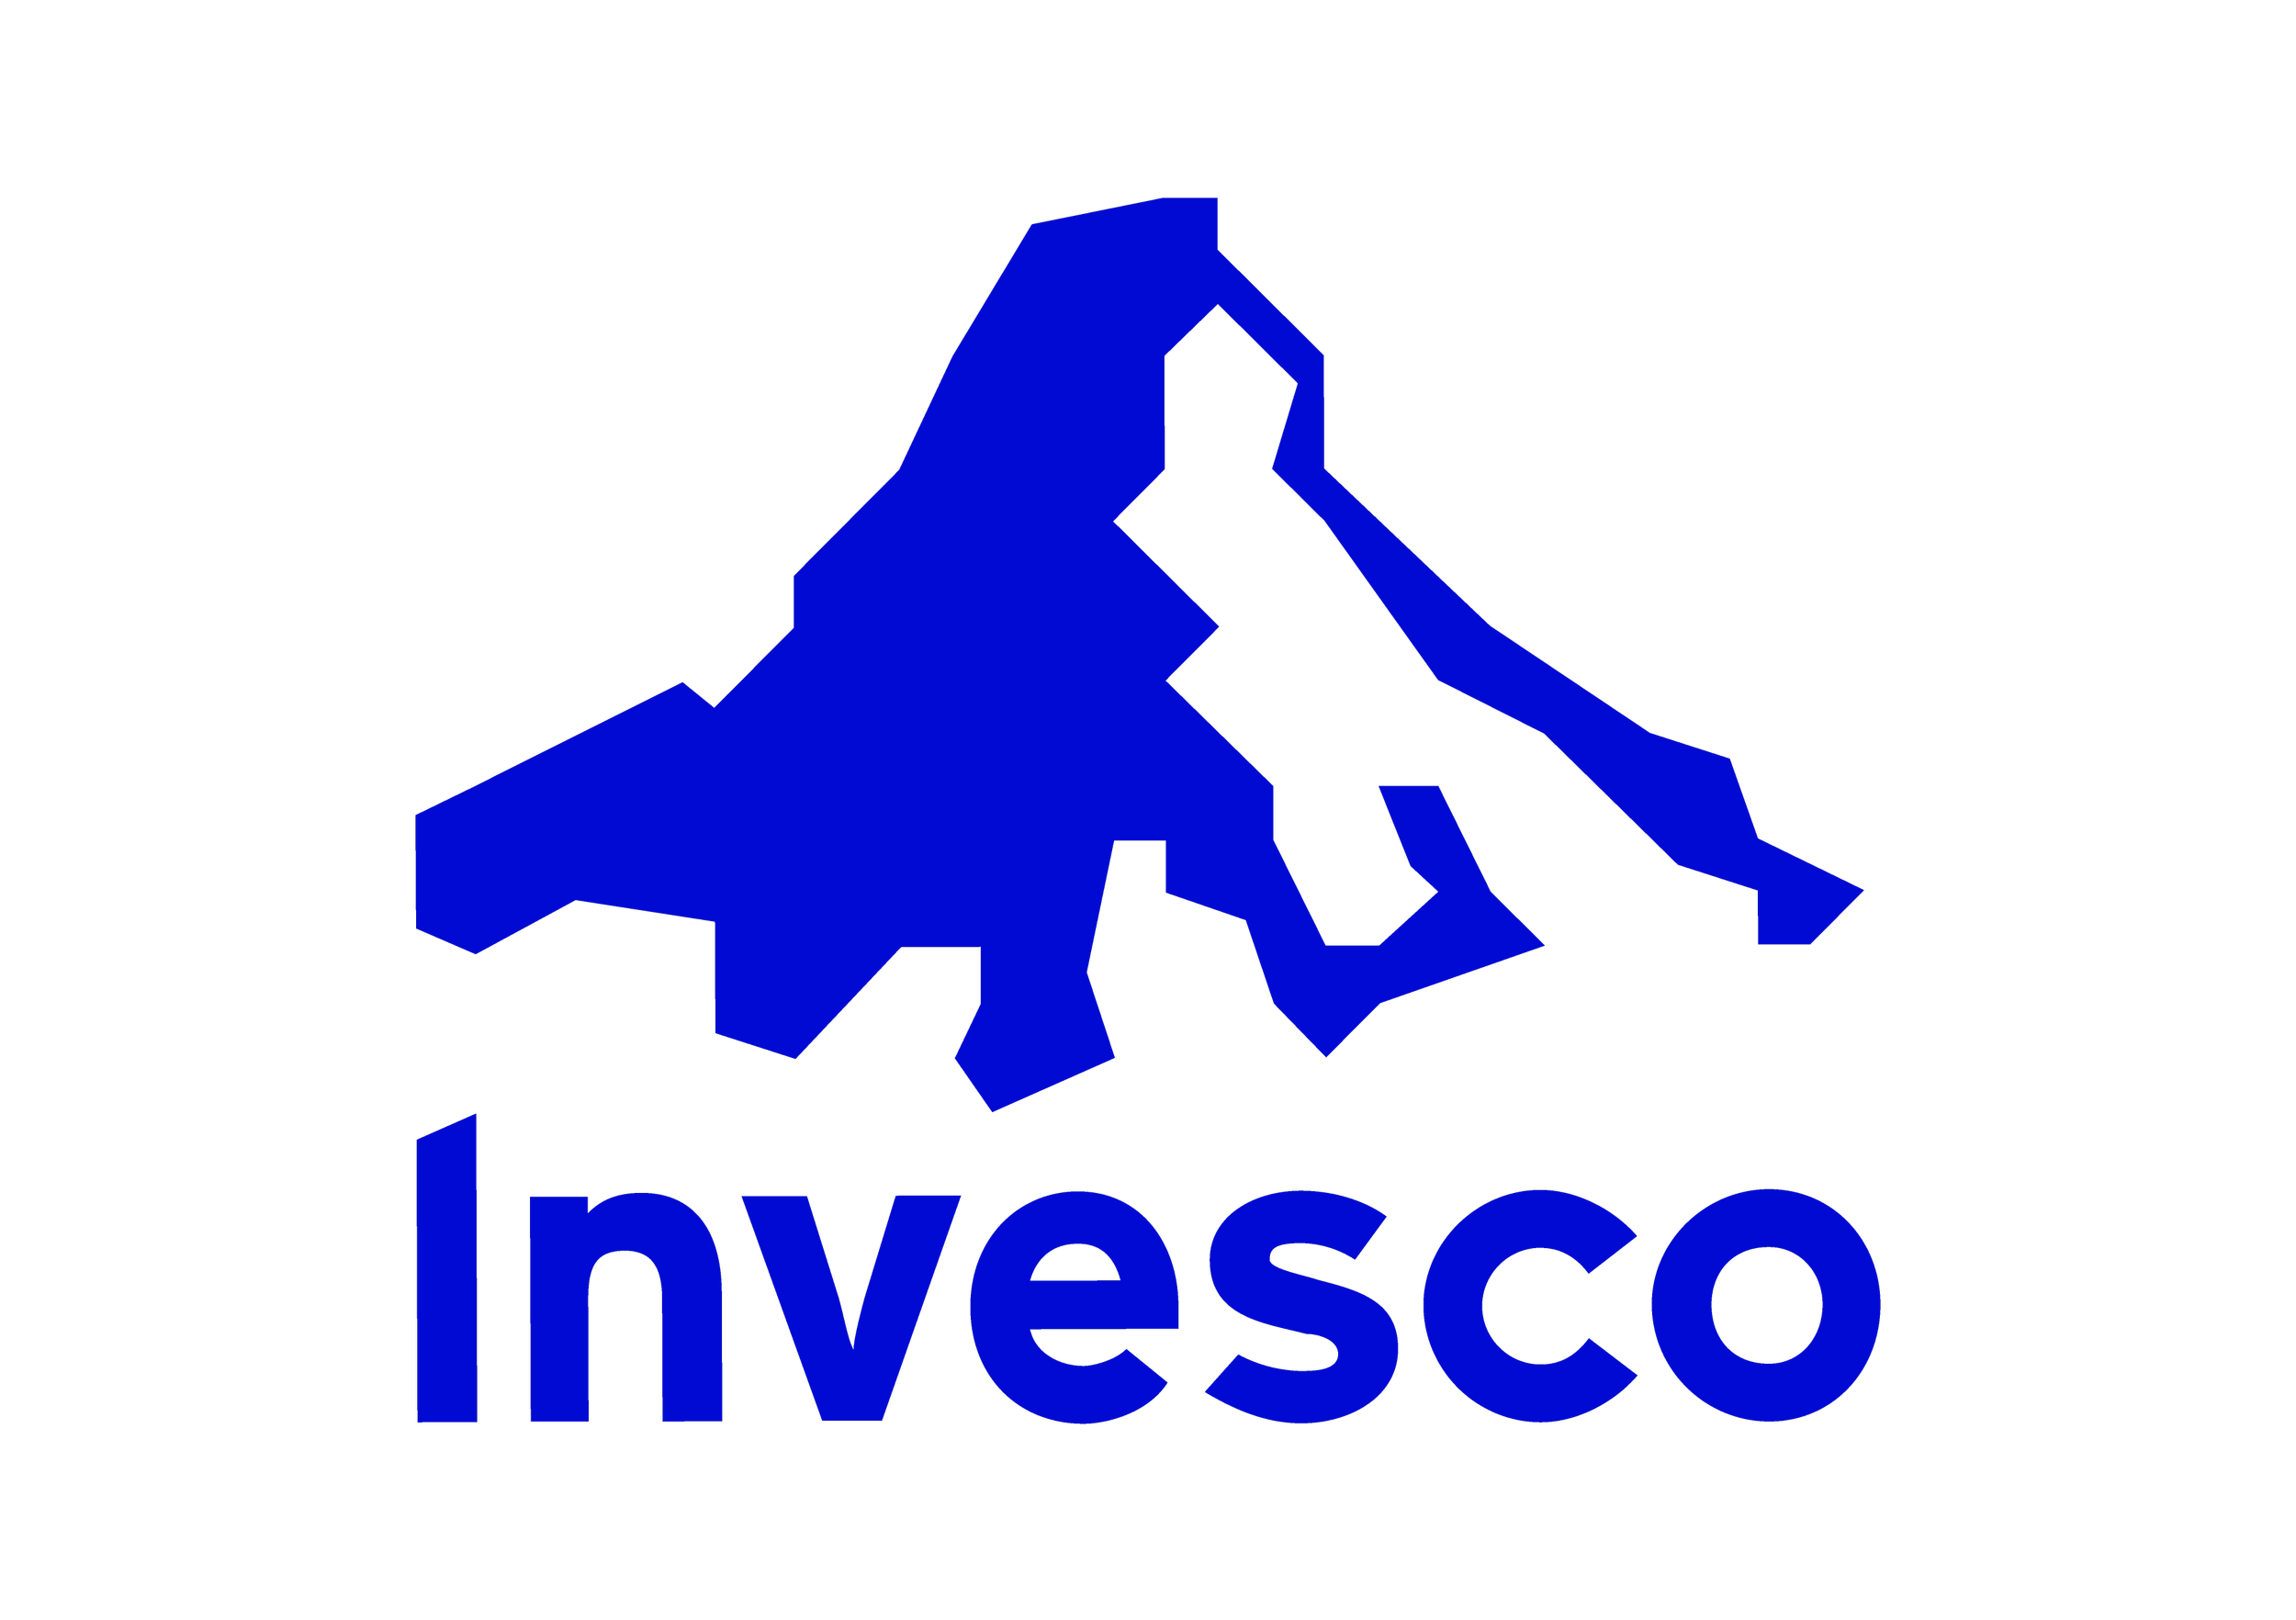 Invesco Corporate.png